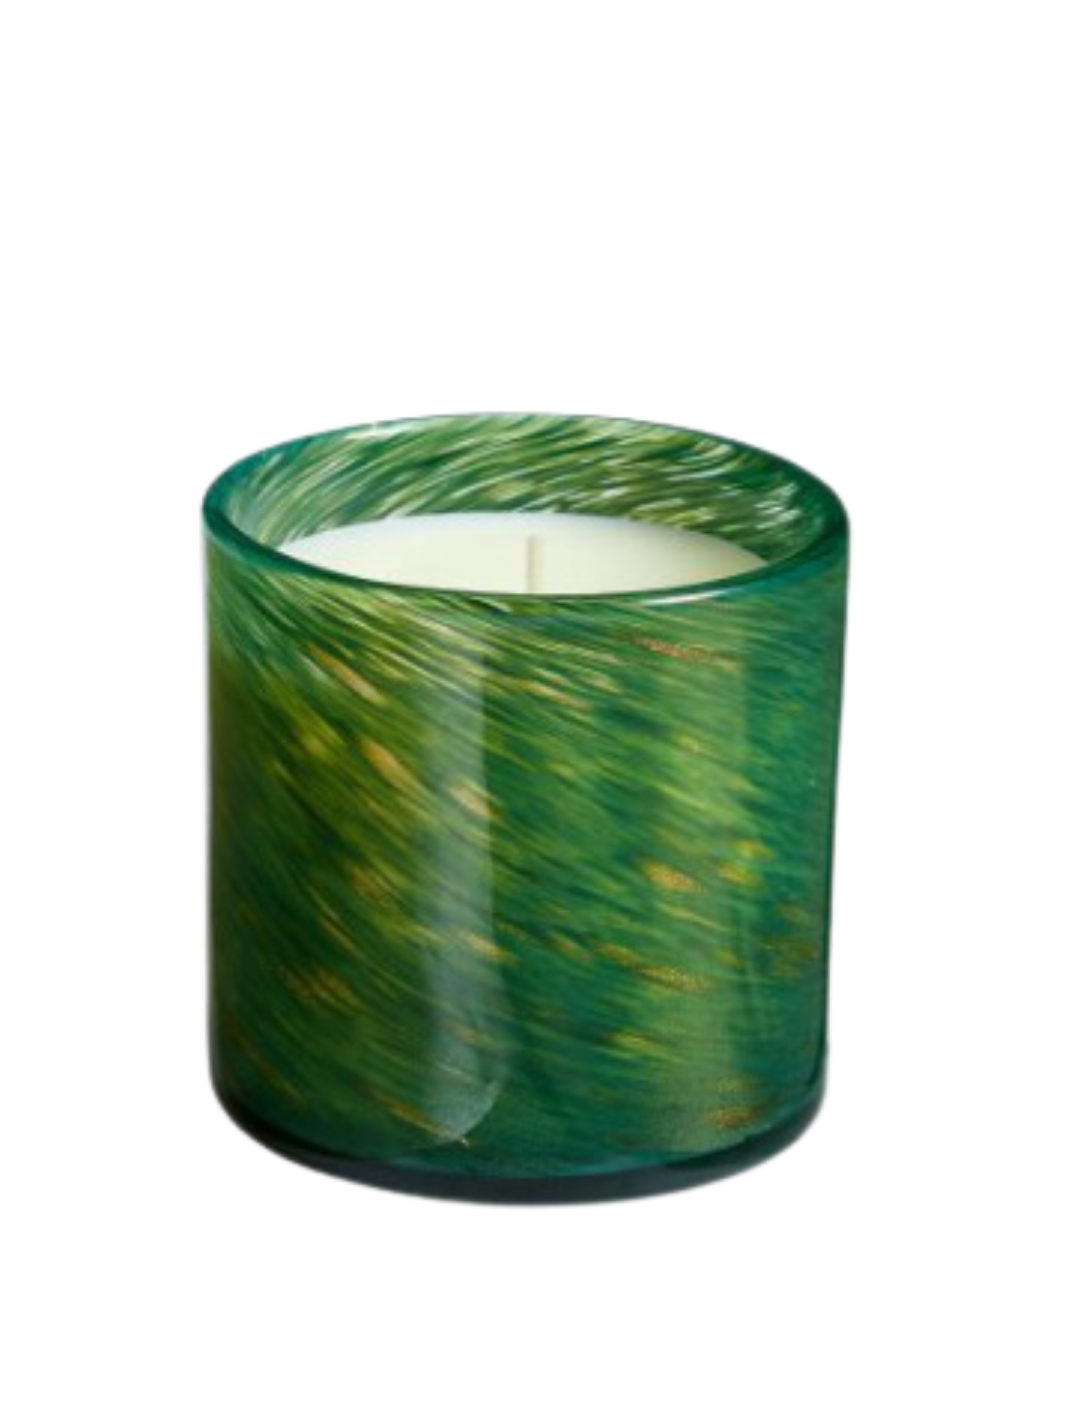 WOODLAND SPRUCE CANDLE 15.5OZ - Romi Boutique